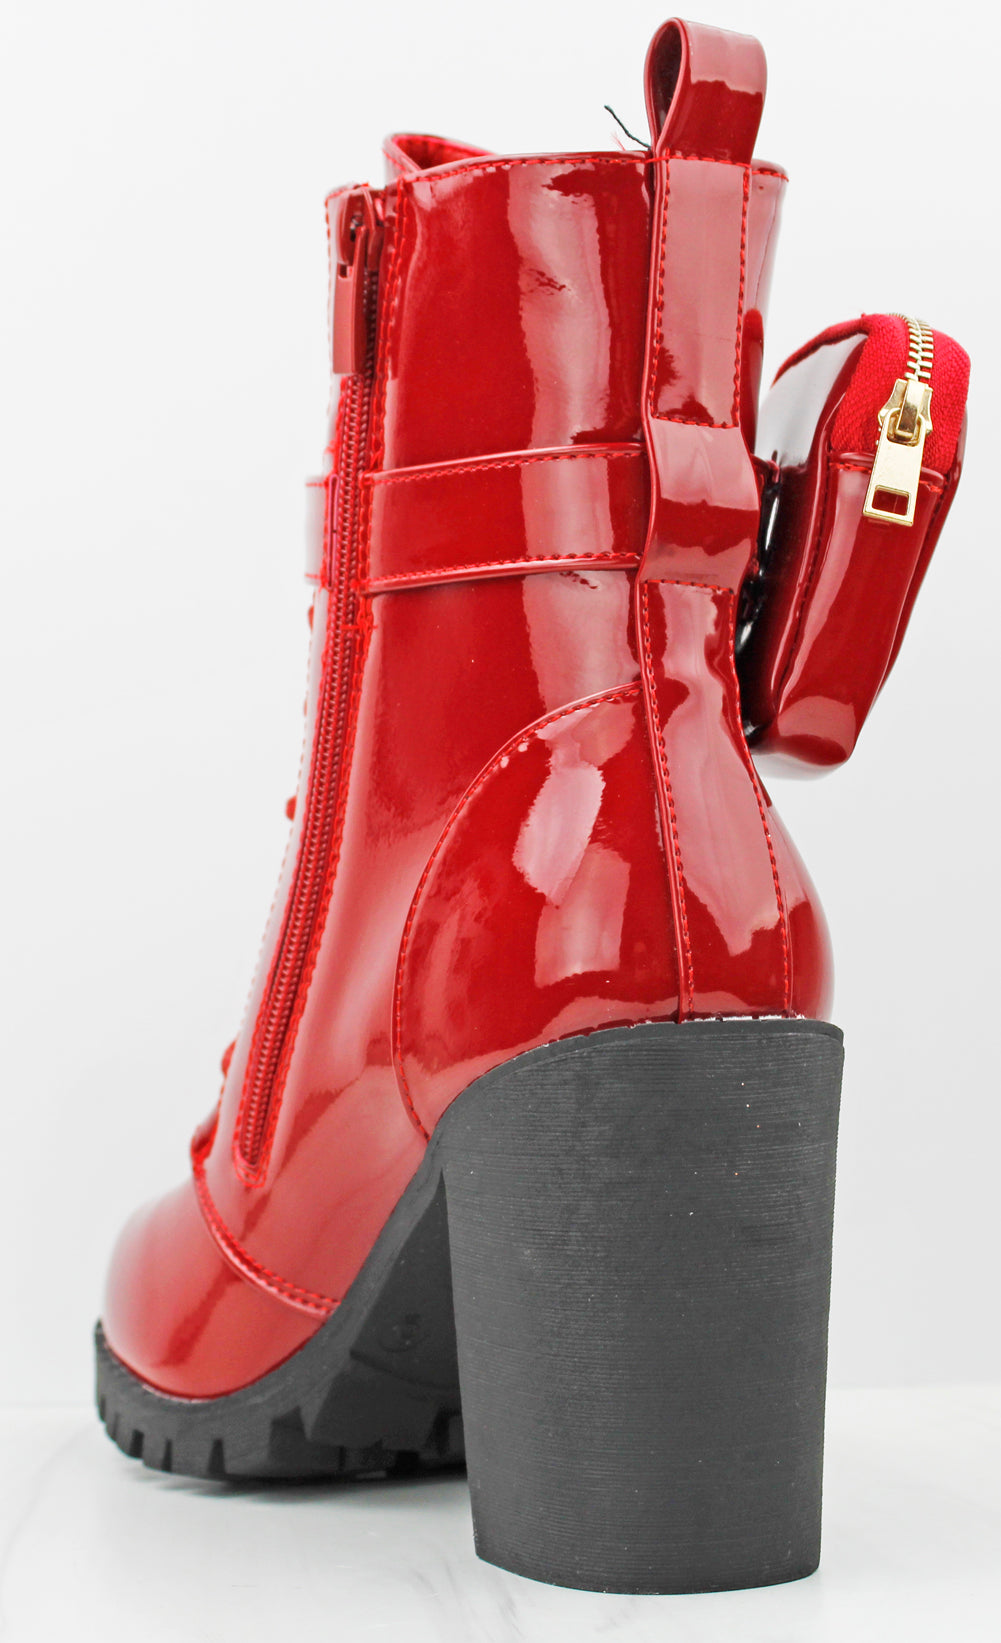 Luxury Designer Brands Combat Boot Women Adox Booty Bottes Spikes Chunky Heels  Ankle Boots Martin Red Sole Booties Party Wedding7091085 From Bev8, $68.81  | DHgate.Com